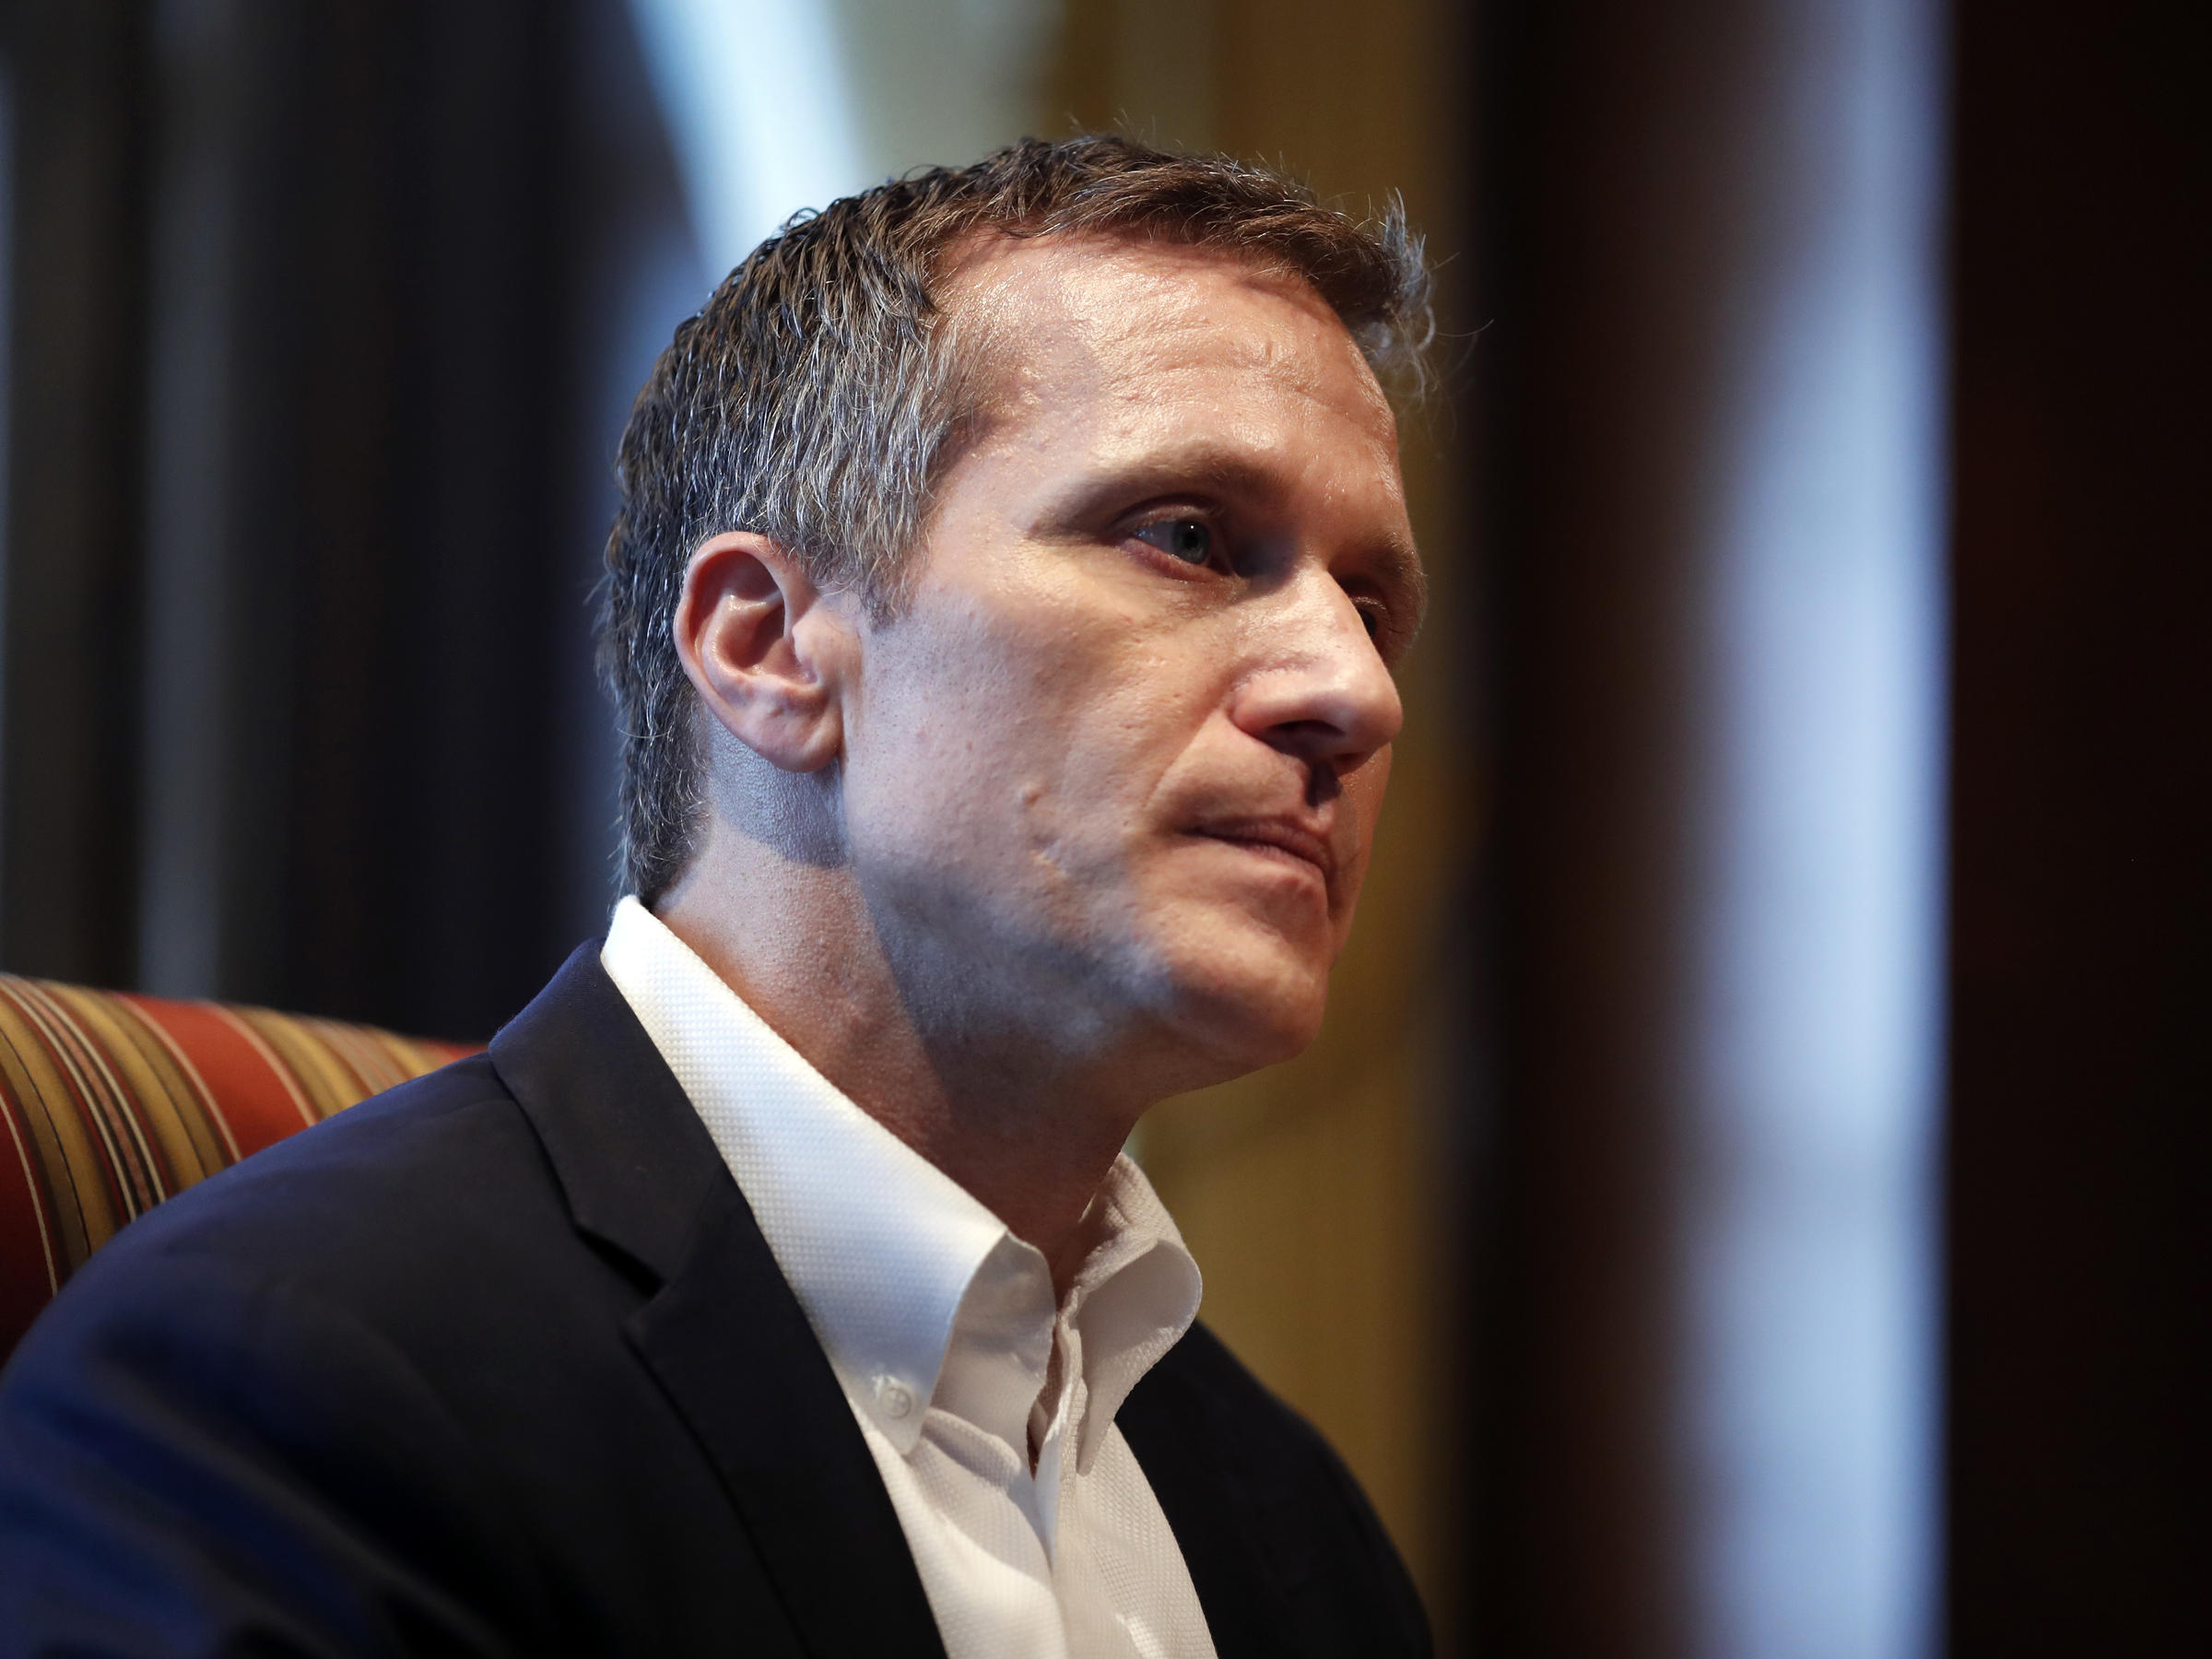 Missouri Governor Eric Greitens charged over nude photo 